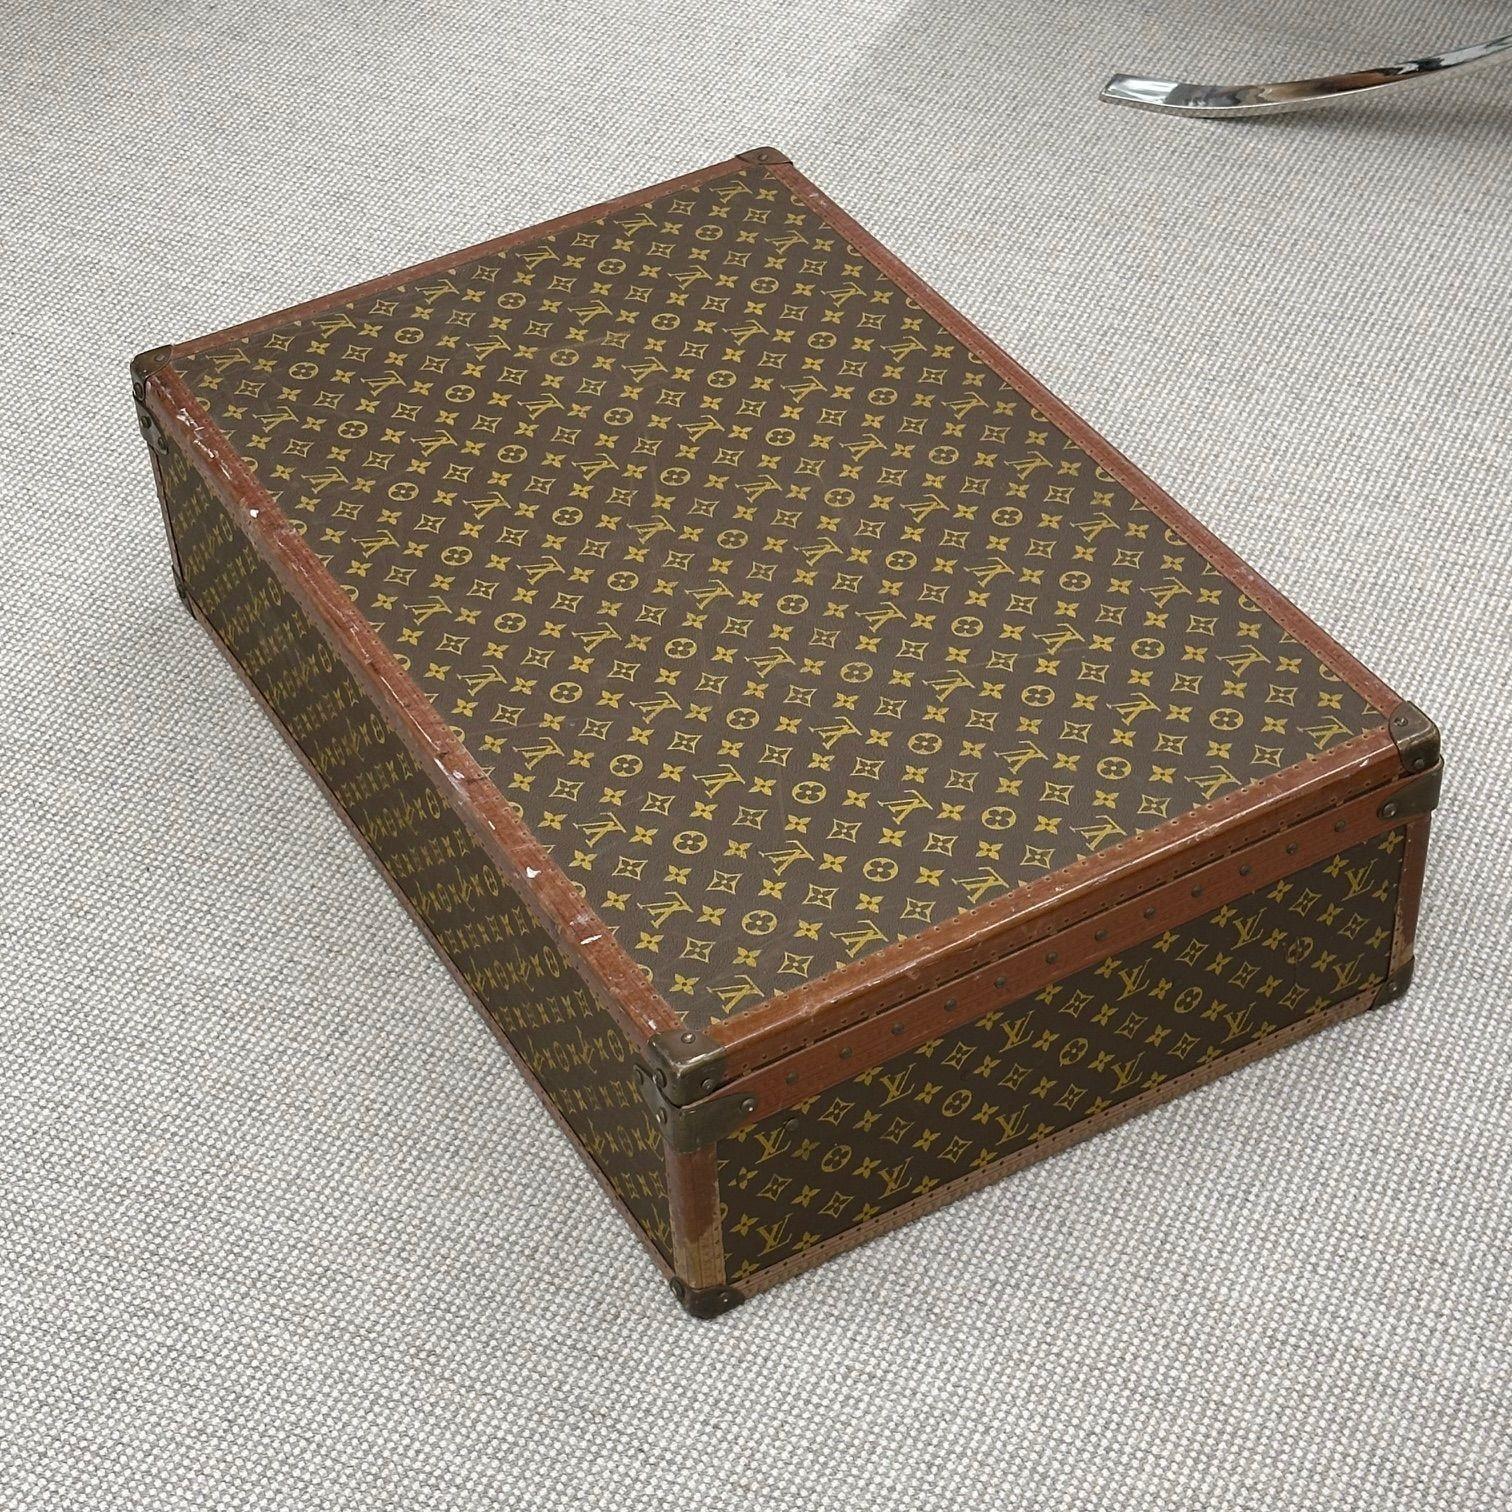 Louis Vuitton Monogram Suitcase / Luggage or Trunk, Alzer 80, Mid 20th Century For Sale 2